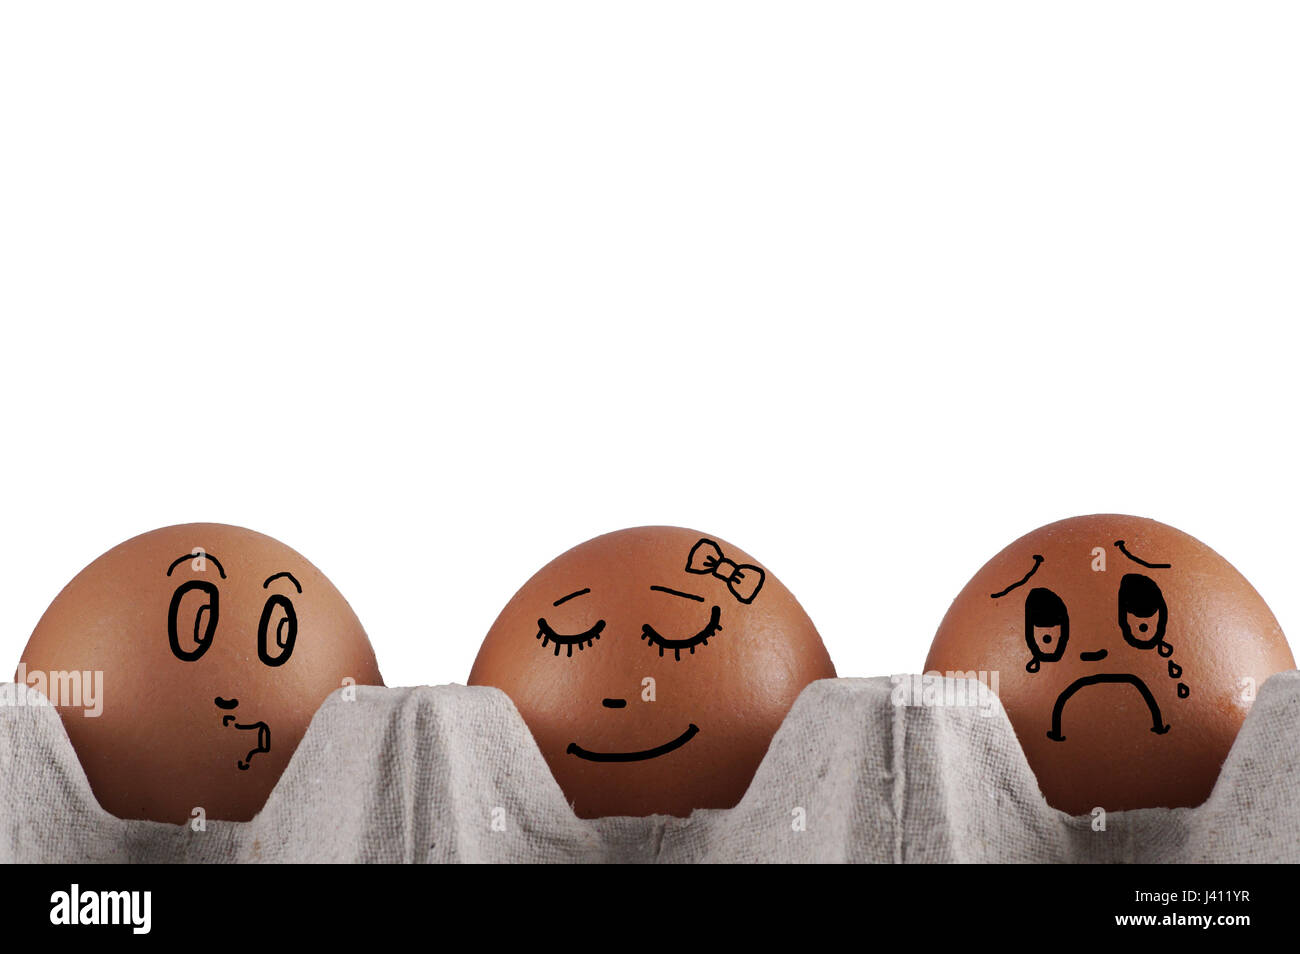 Excitement, Calm and Sad Expression style with egg characters Stock Photo